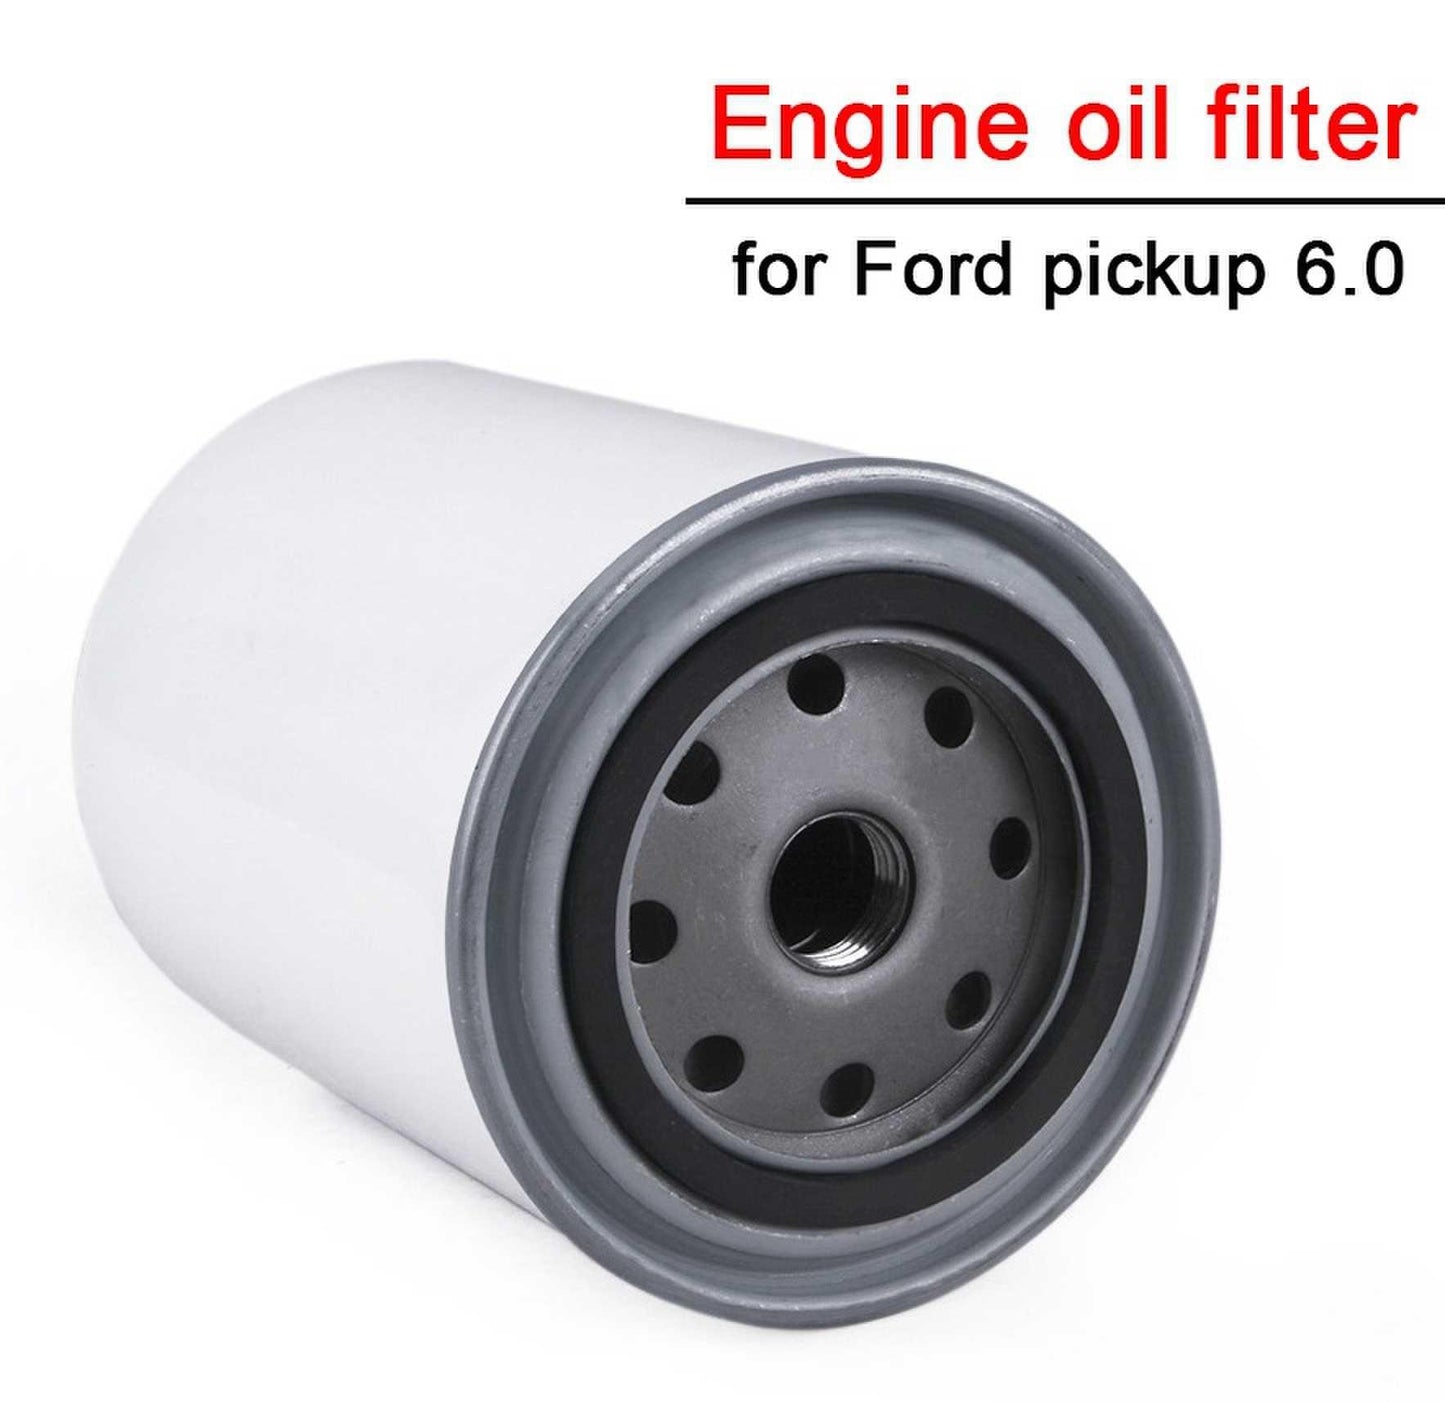 RASTP High Quality Oil Filter Fuel Filter for Ford Pickup and 6.0 OFTE Treated Sealing Gasked - RASTP